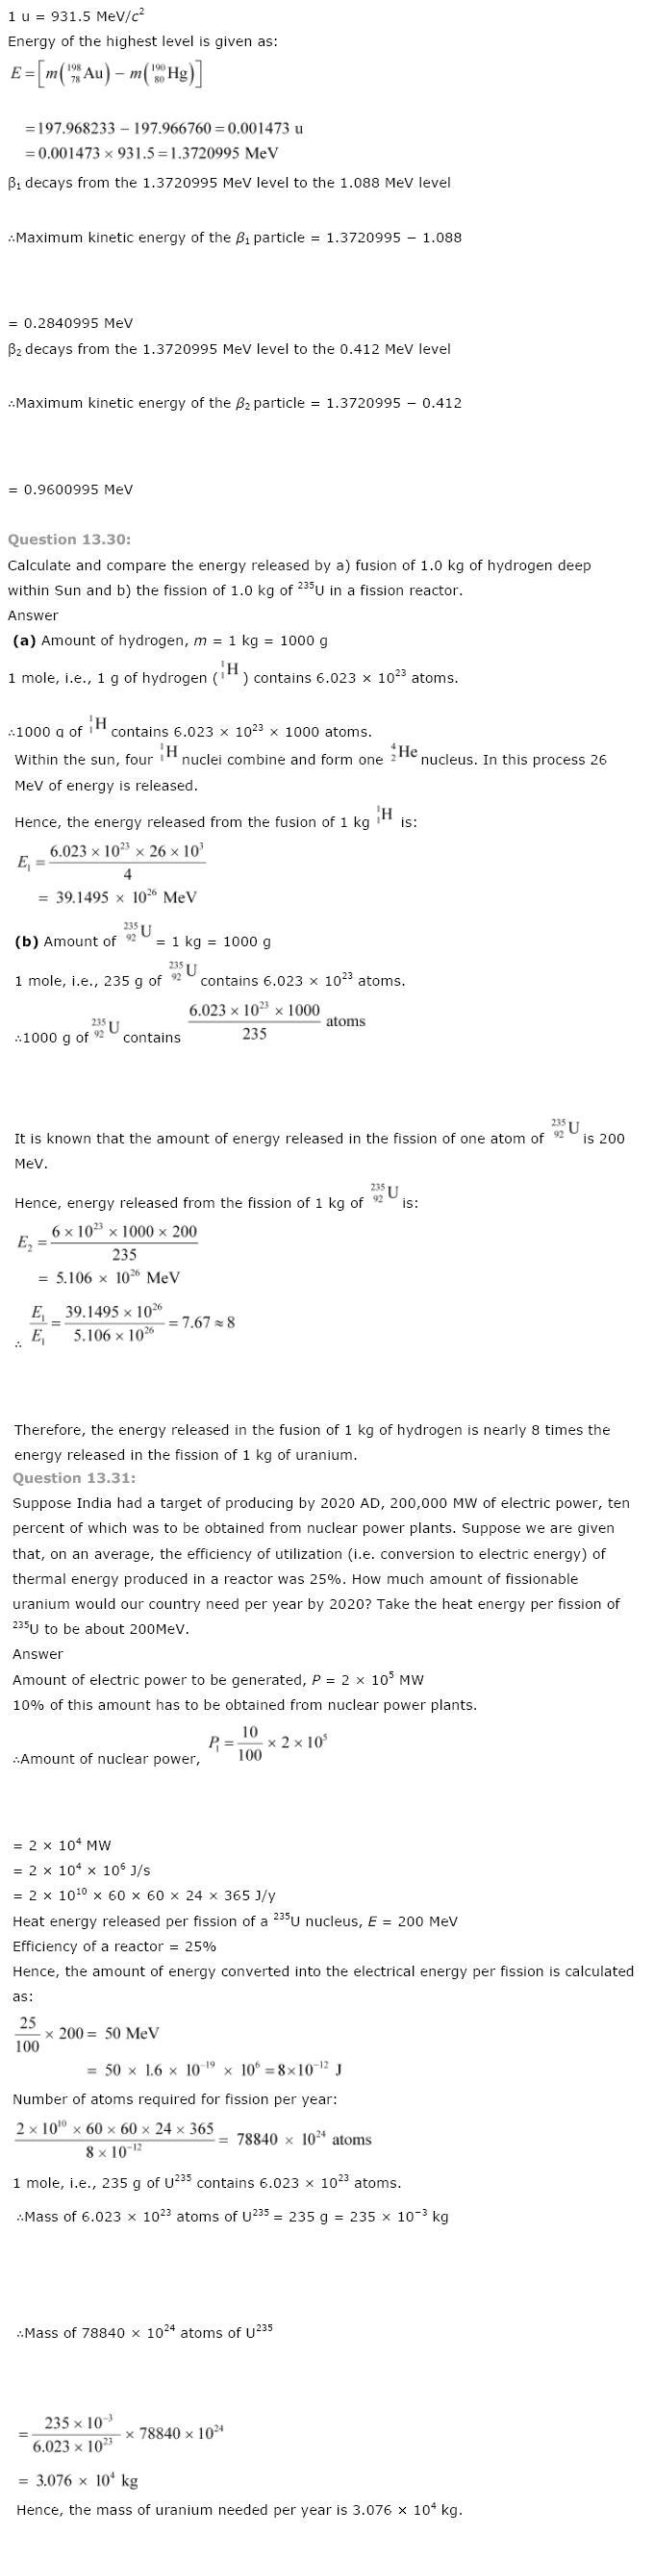 NCERT Solutions For Class 12 Physics Chapter 13 Nuclei 7